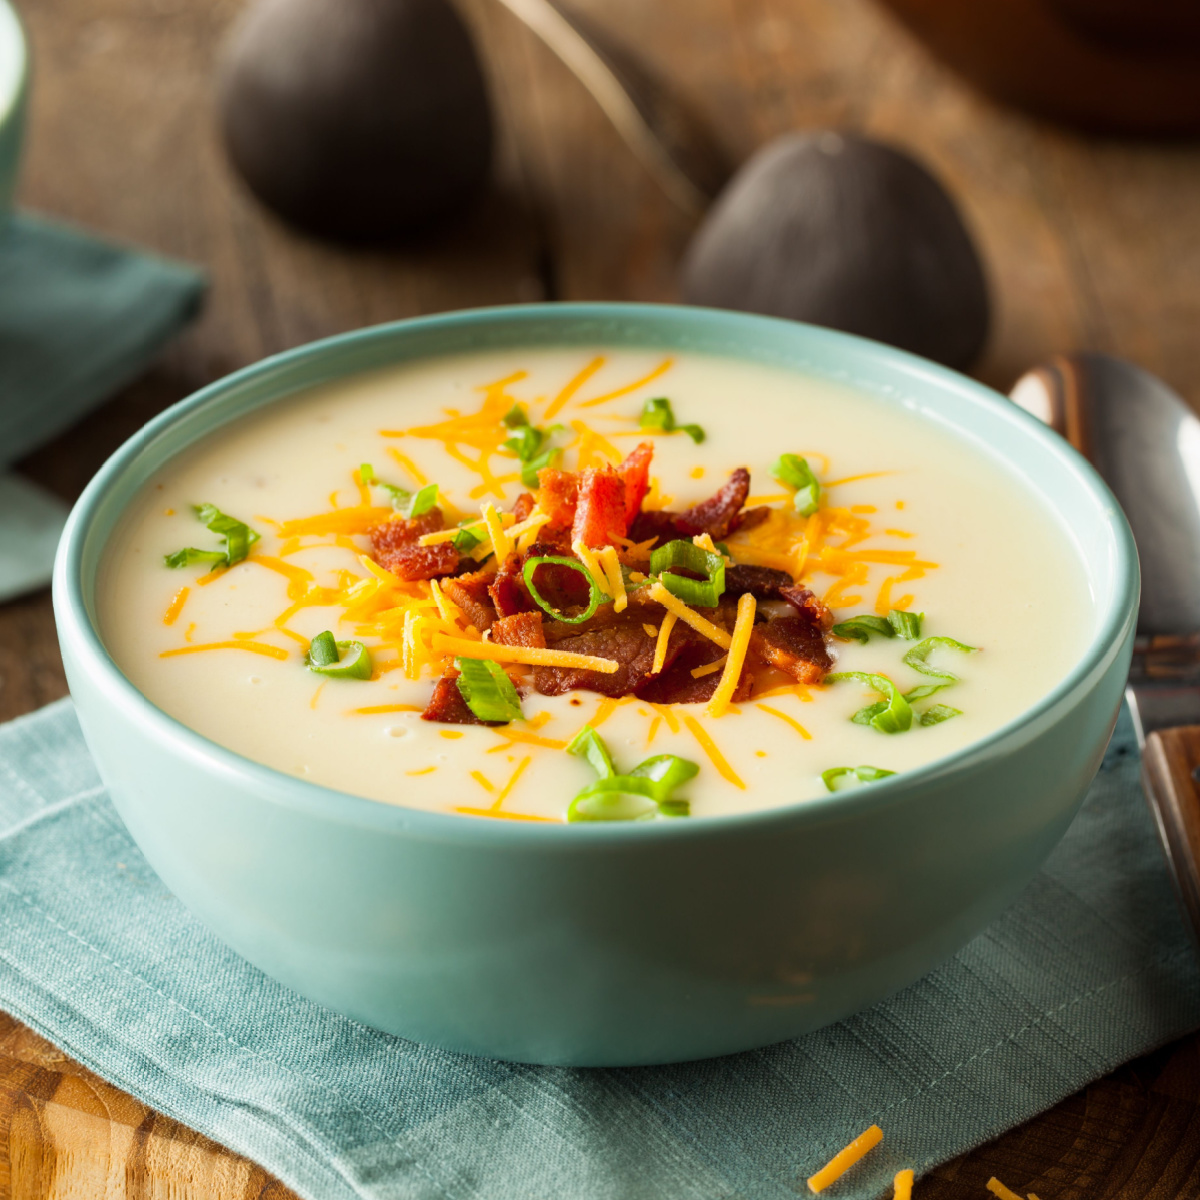 Experts Agree: This Popular Fall Soup Can Actually Lead To Inflammation ...